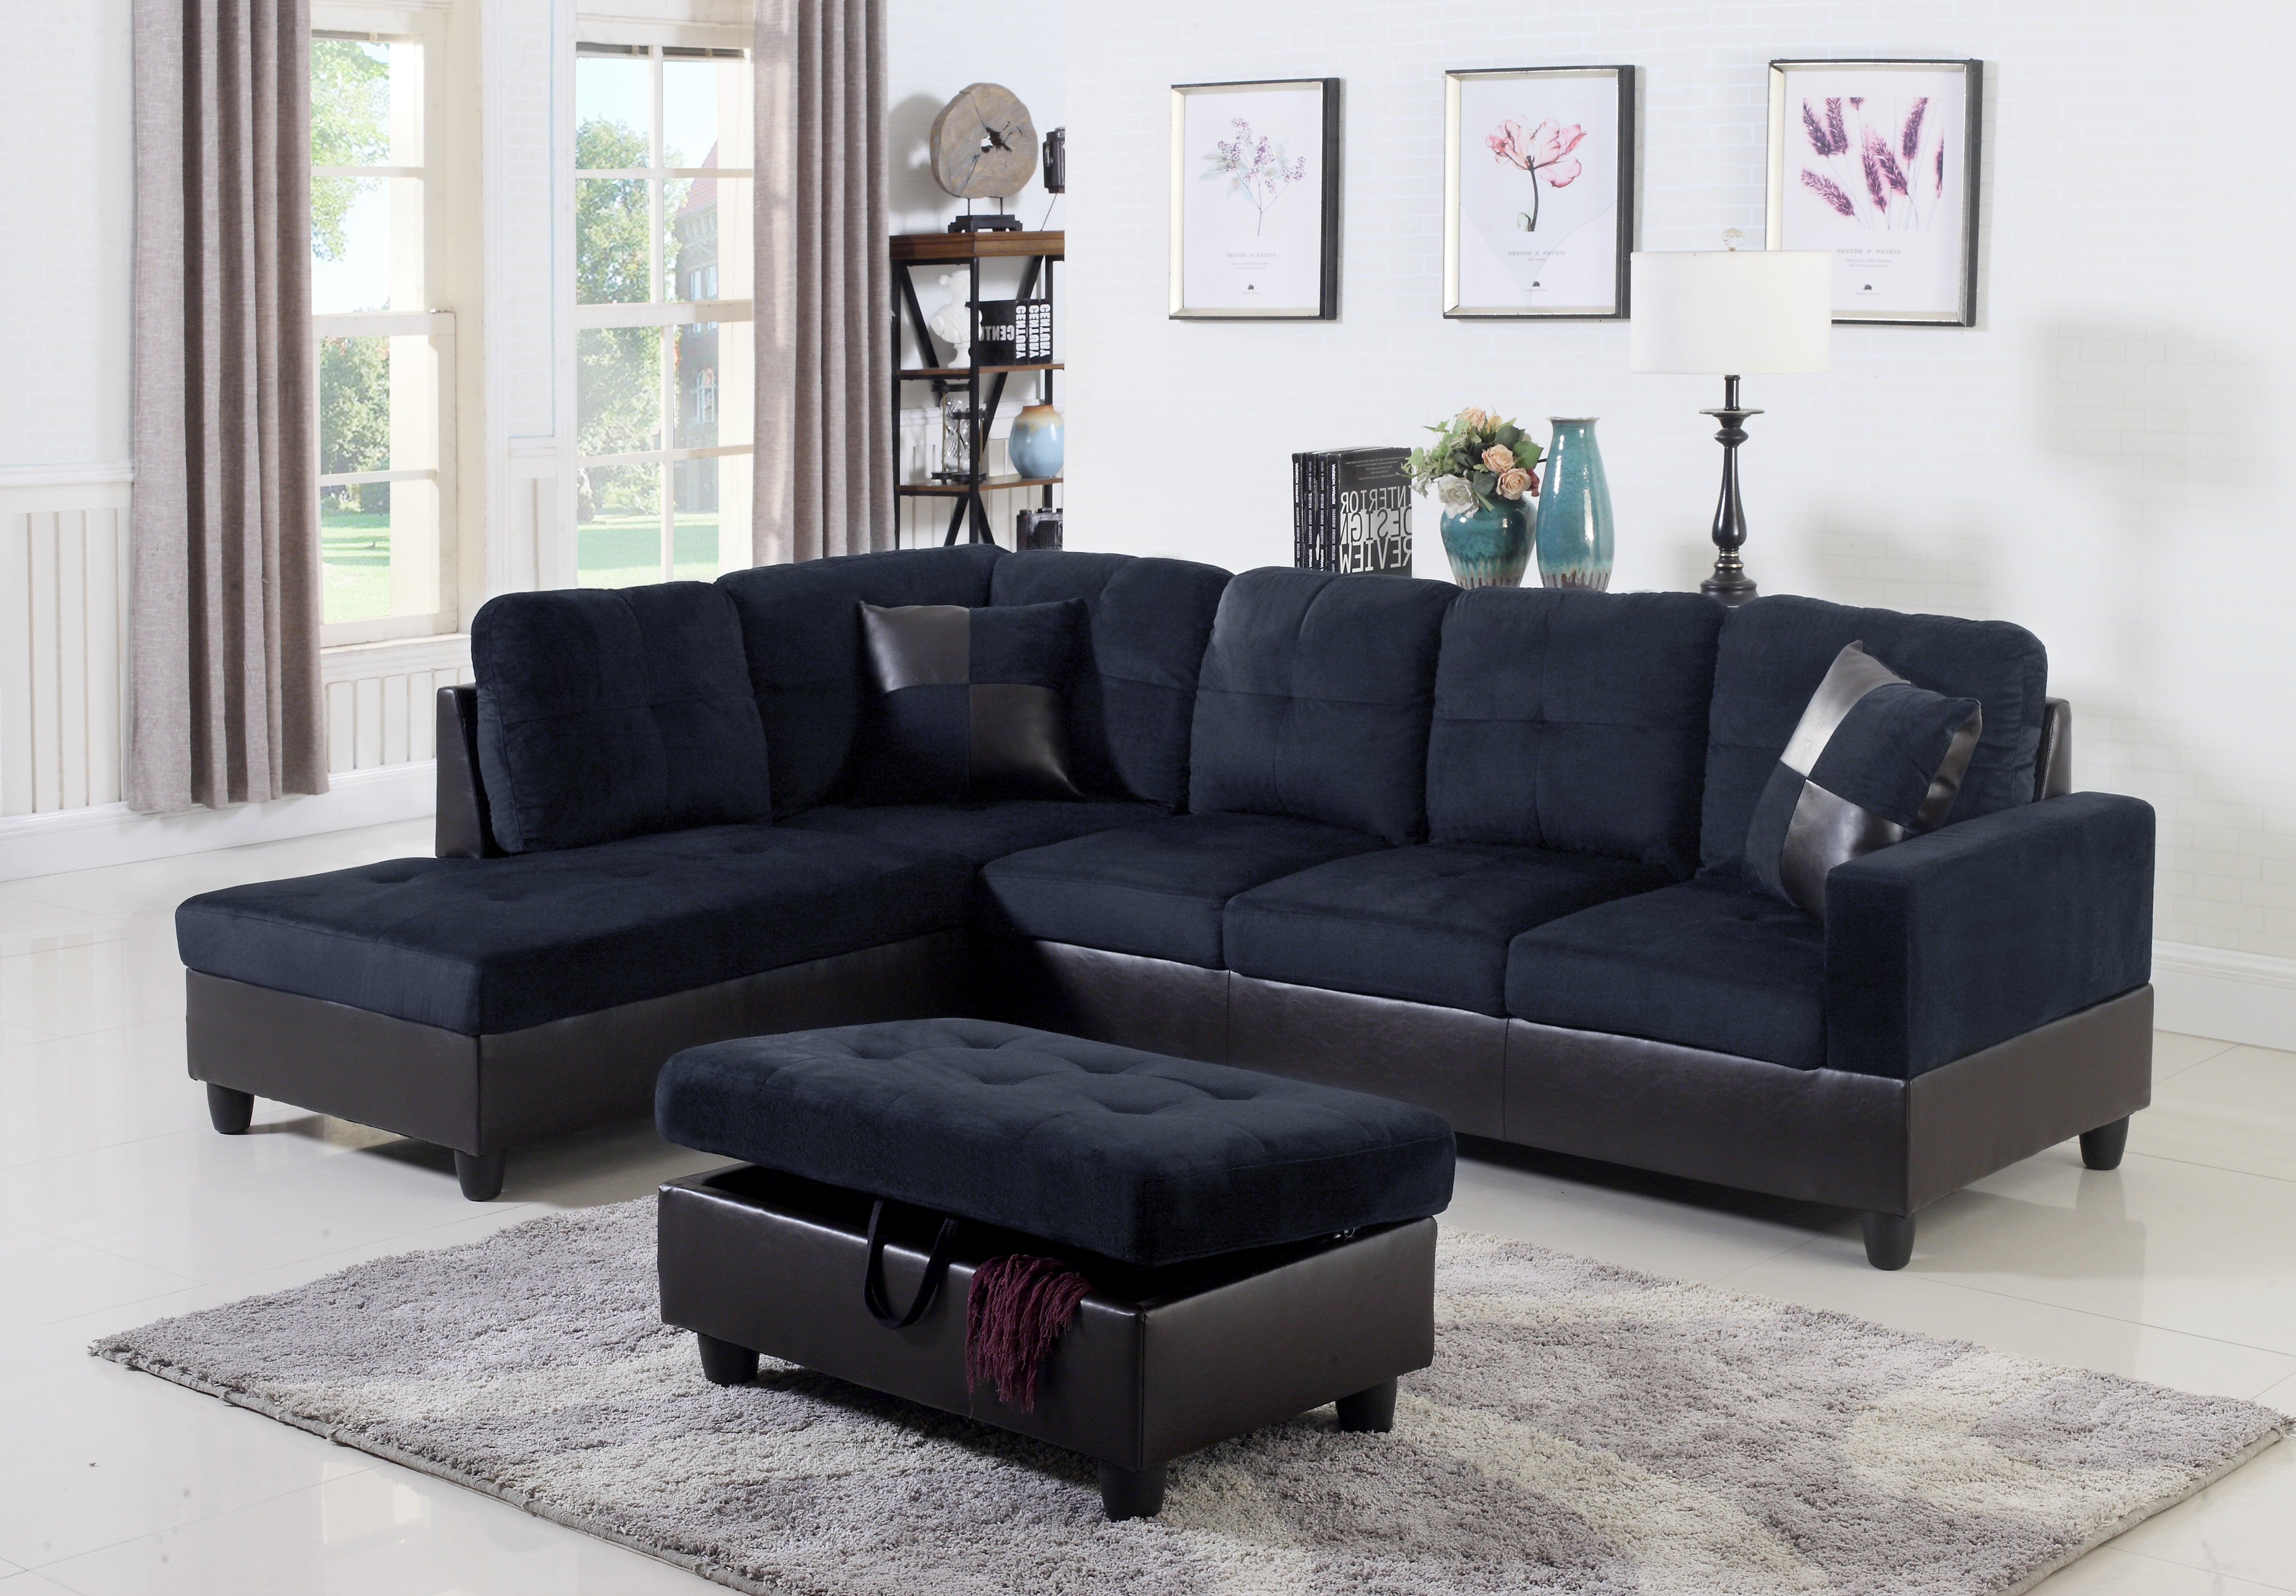 Dark Blue And Brown Color Lint And PVC 3-Piece Couch Living Room Sofa Set